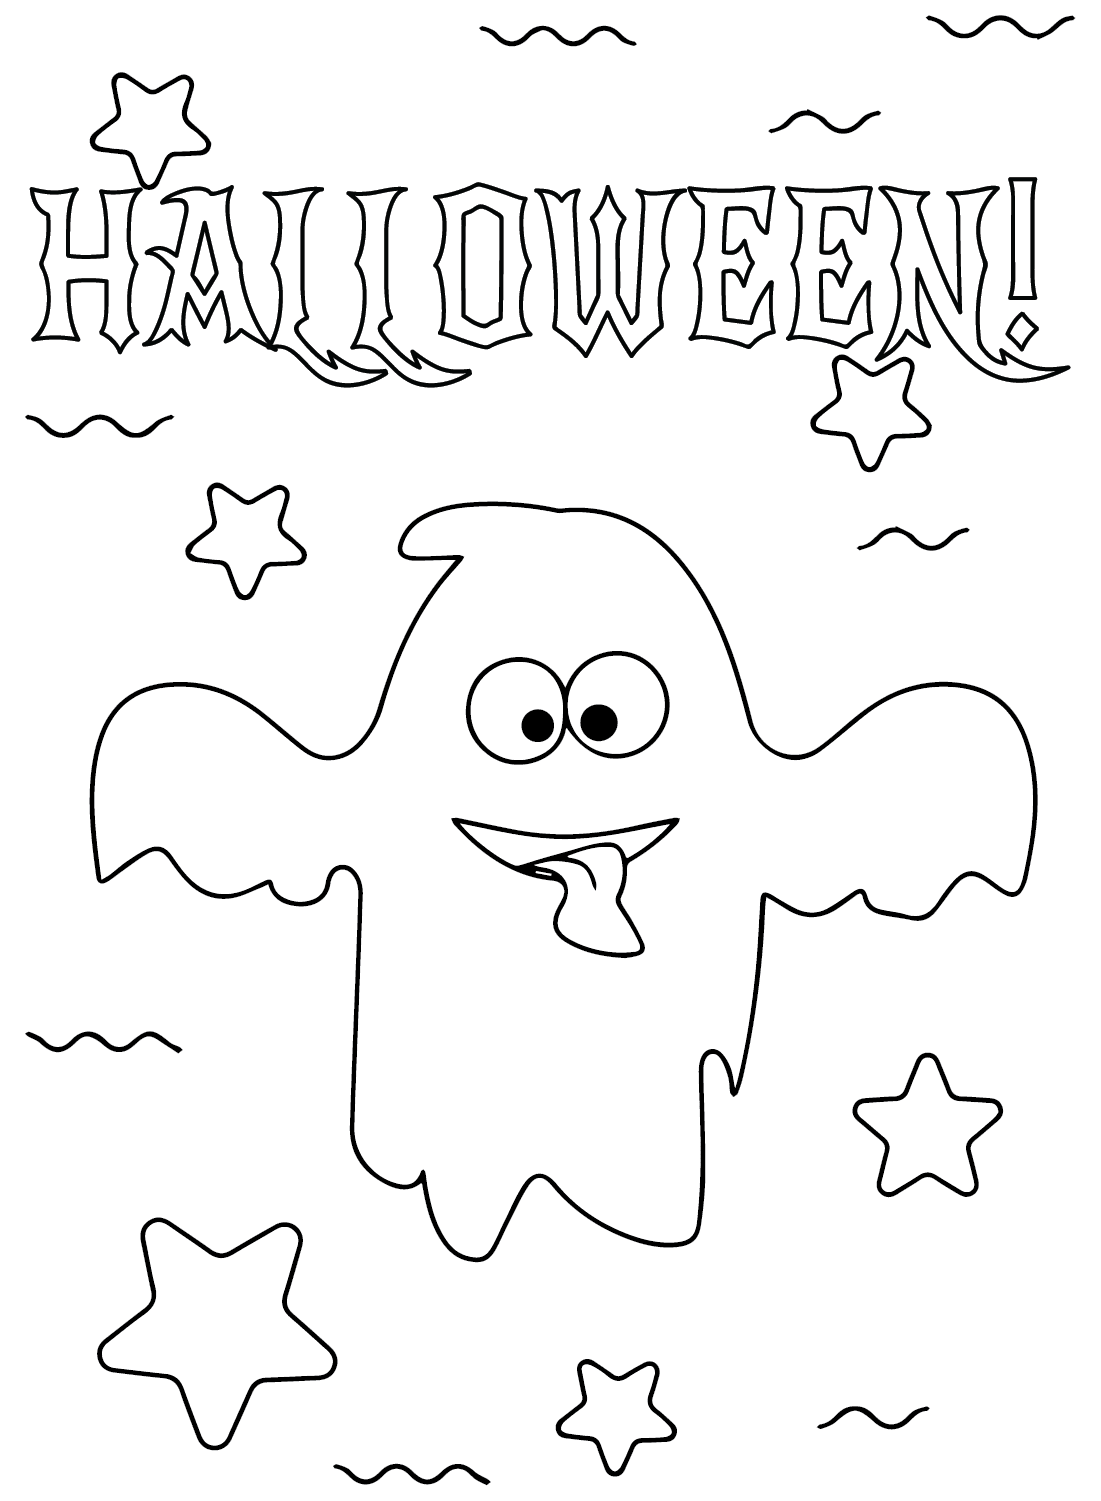 Ghost Coloring Pages Printable - Free Printable Coloring Pages